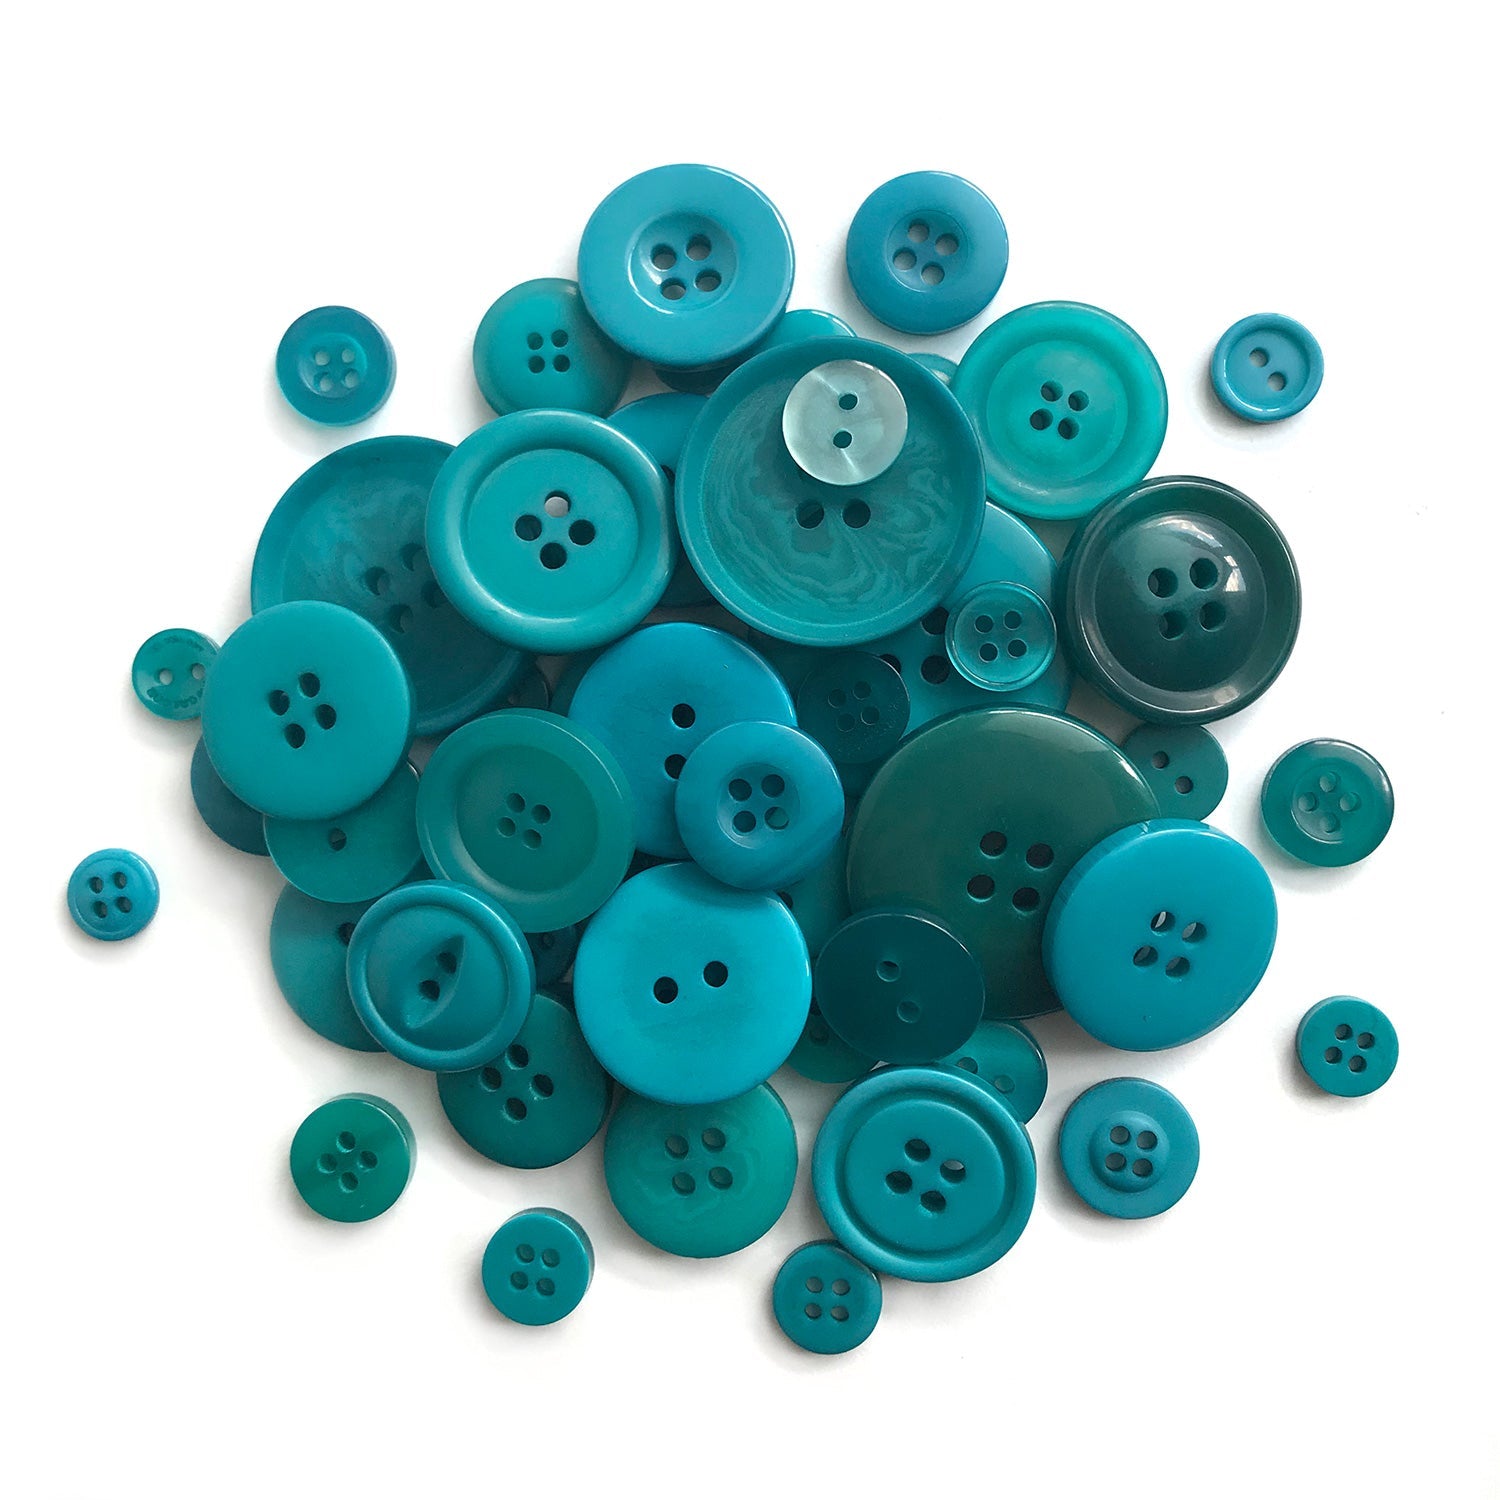 Assorted White Buttons in Bulk for Button Crafts, Buttons Galore